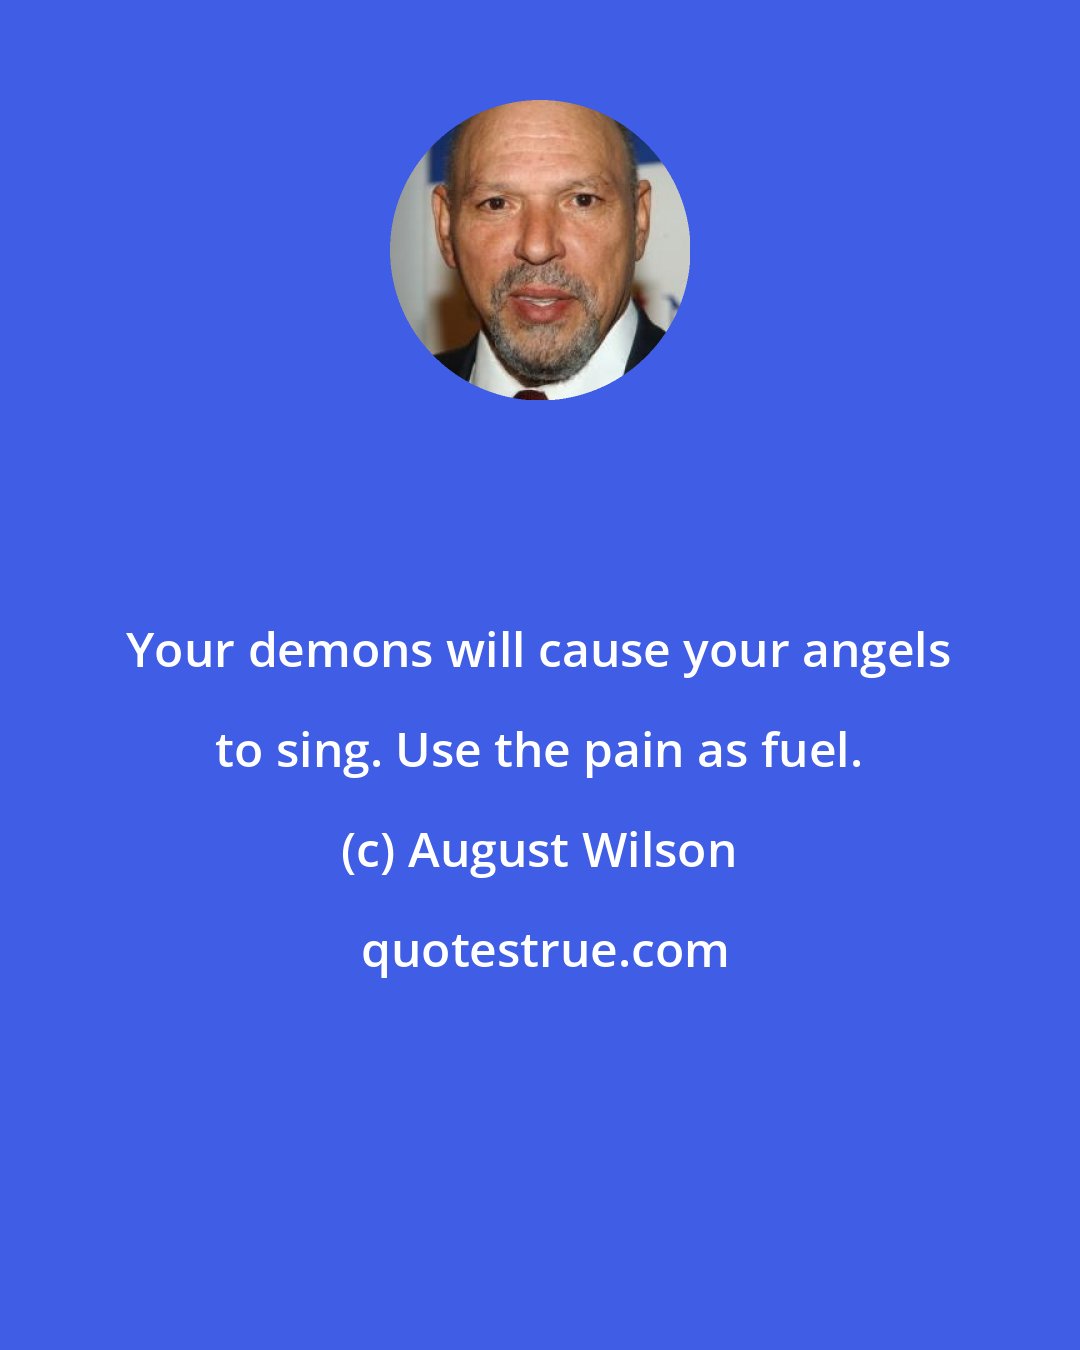 August Wilson: Your demons will cause your angels to sing. Use the pain as fuel.